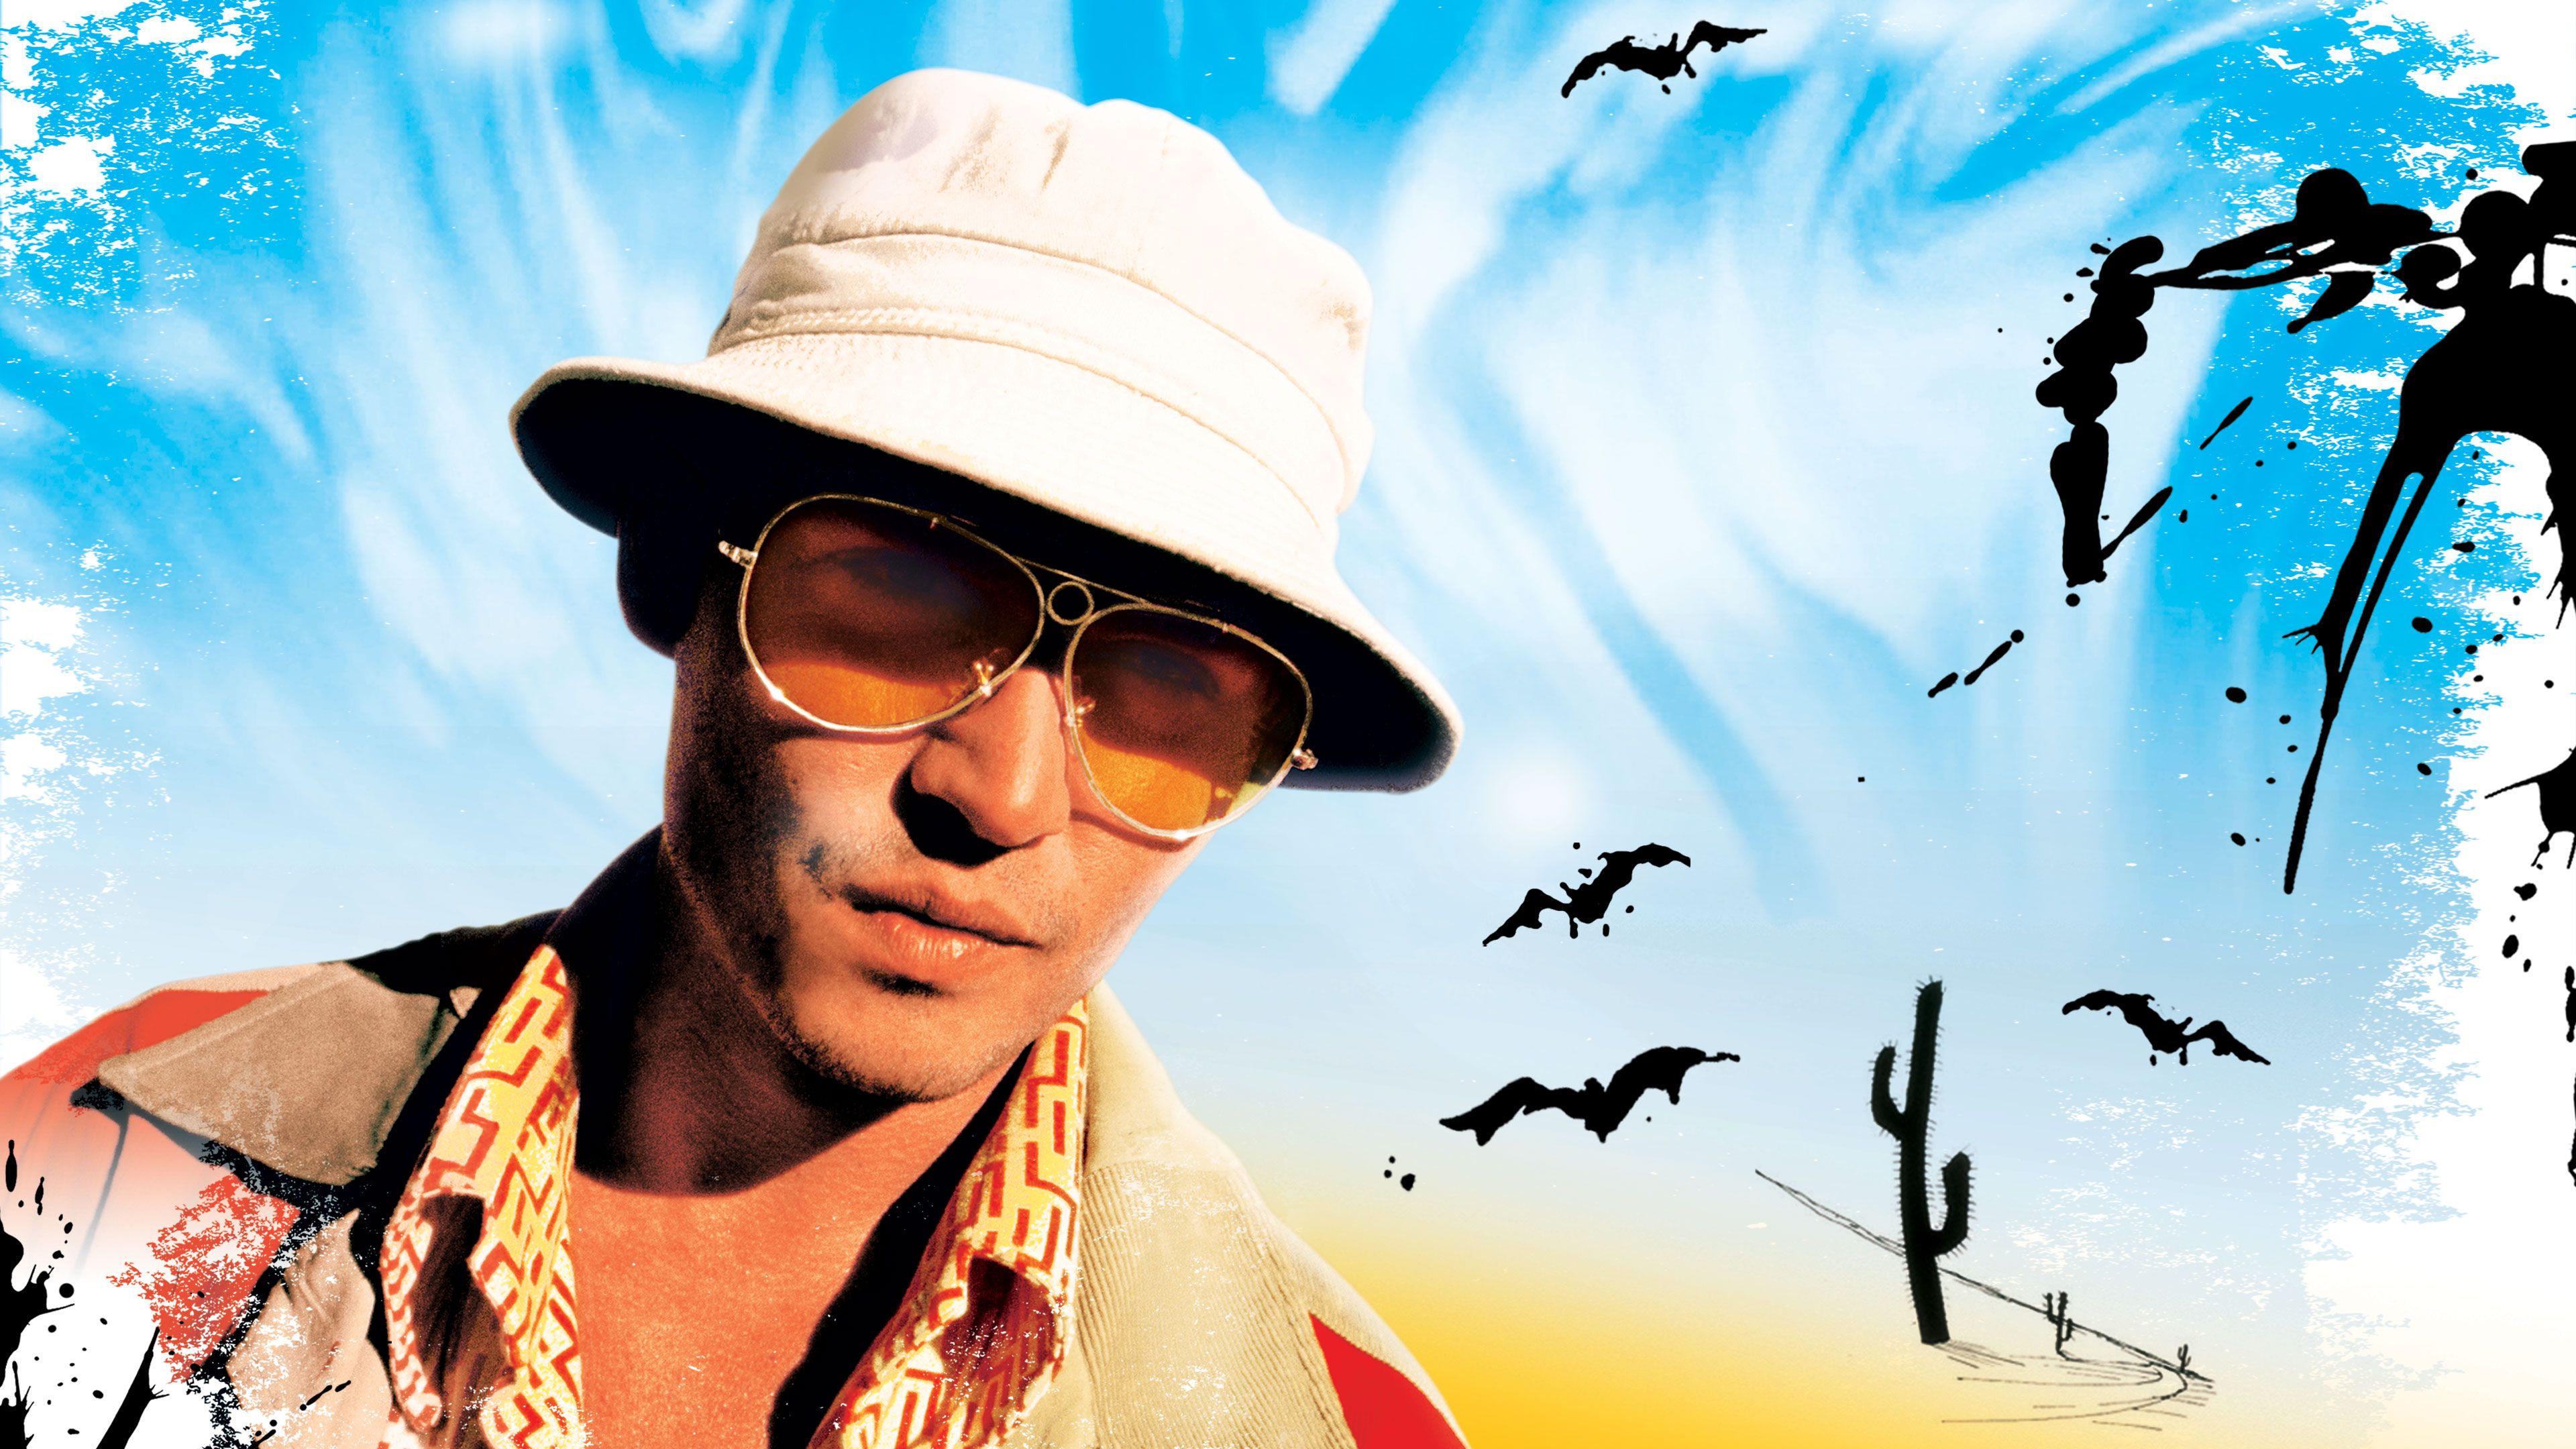 where can i watch fear and loathing in las vegas